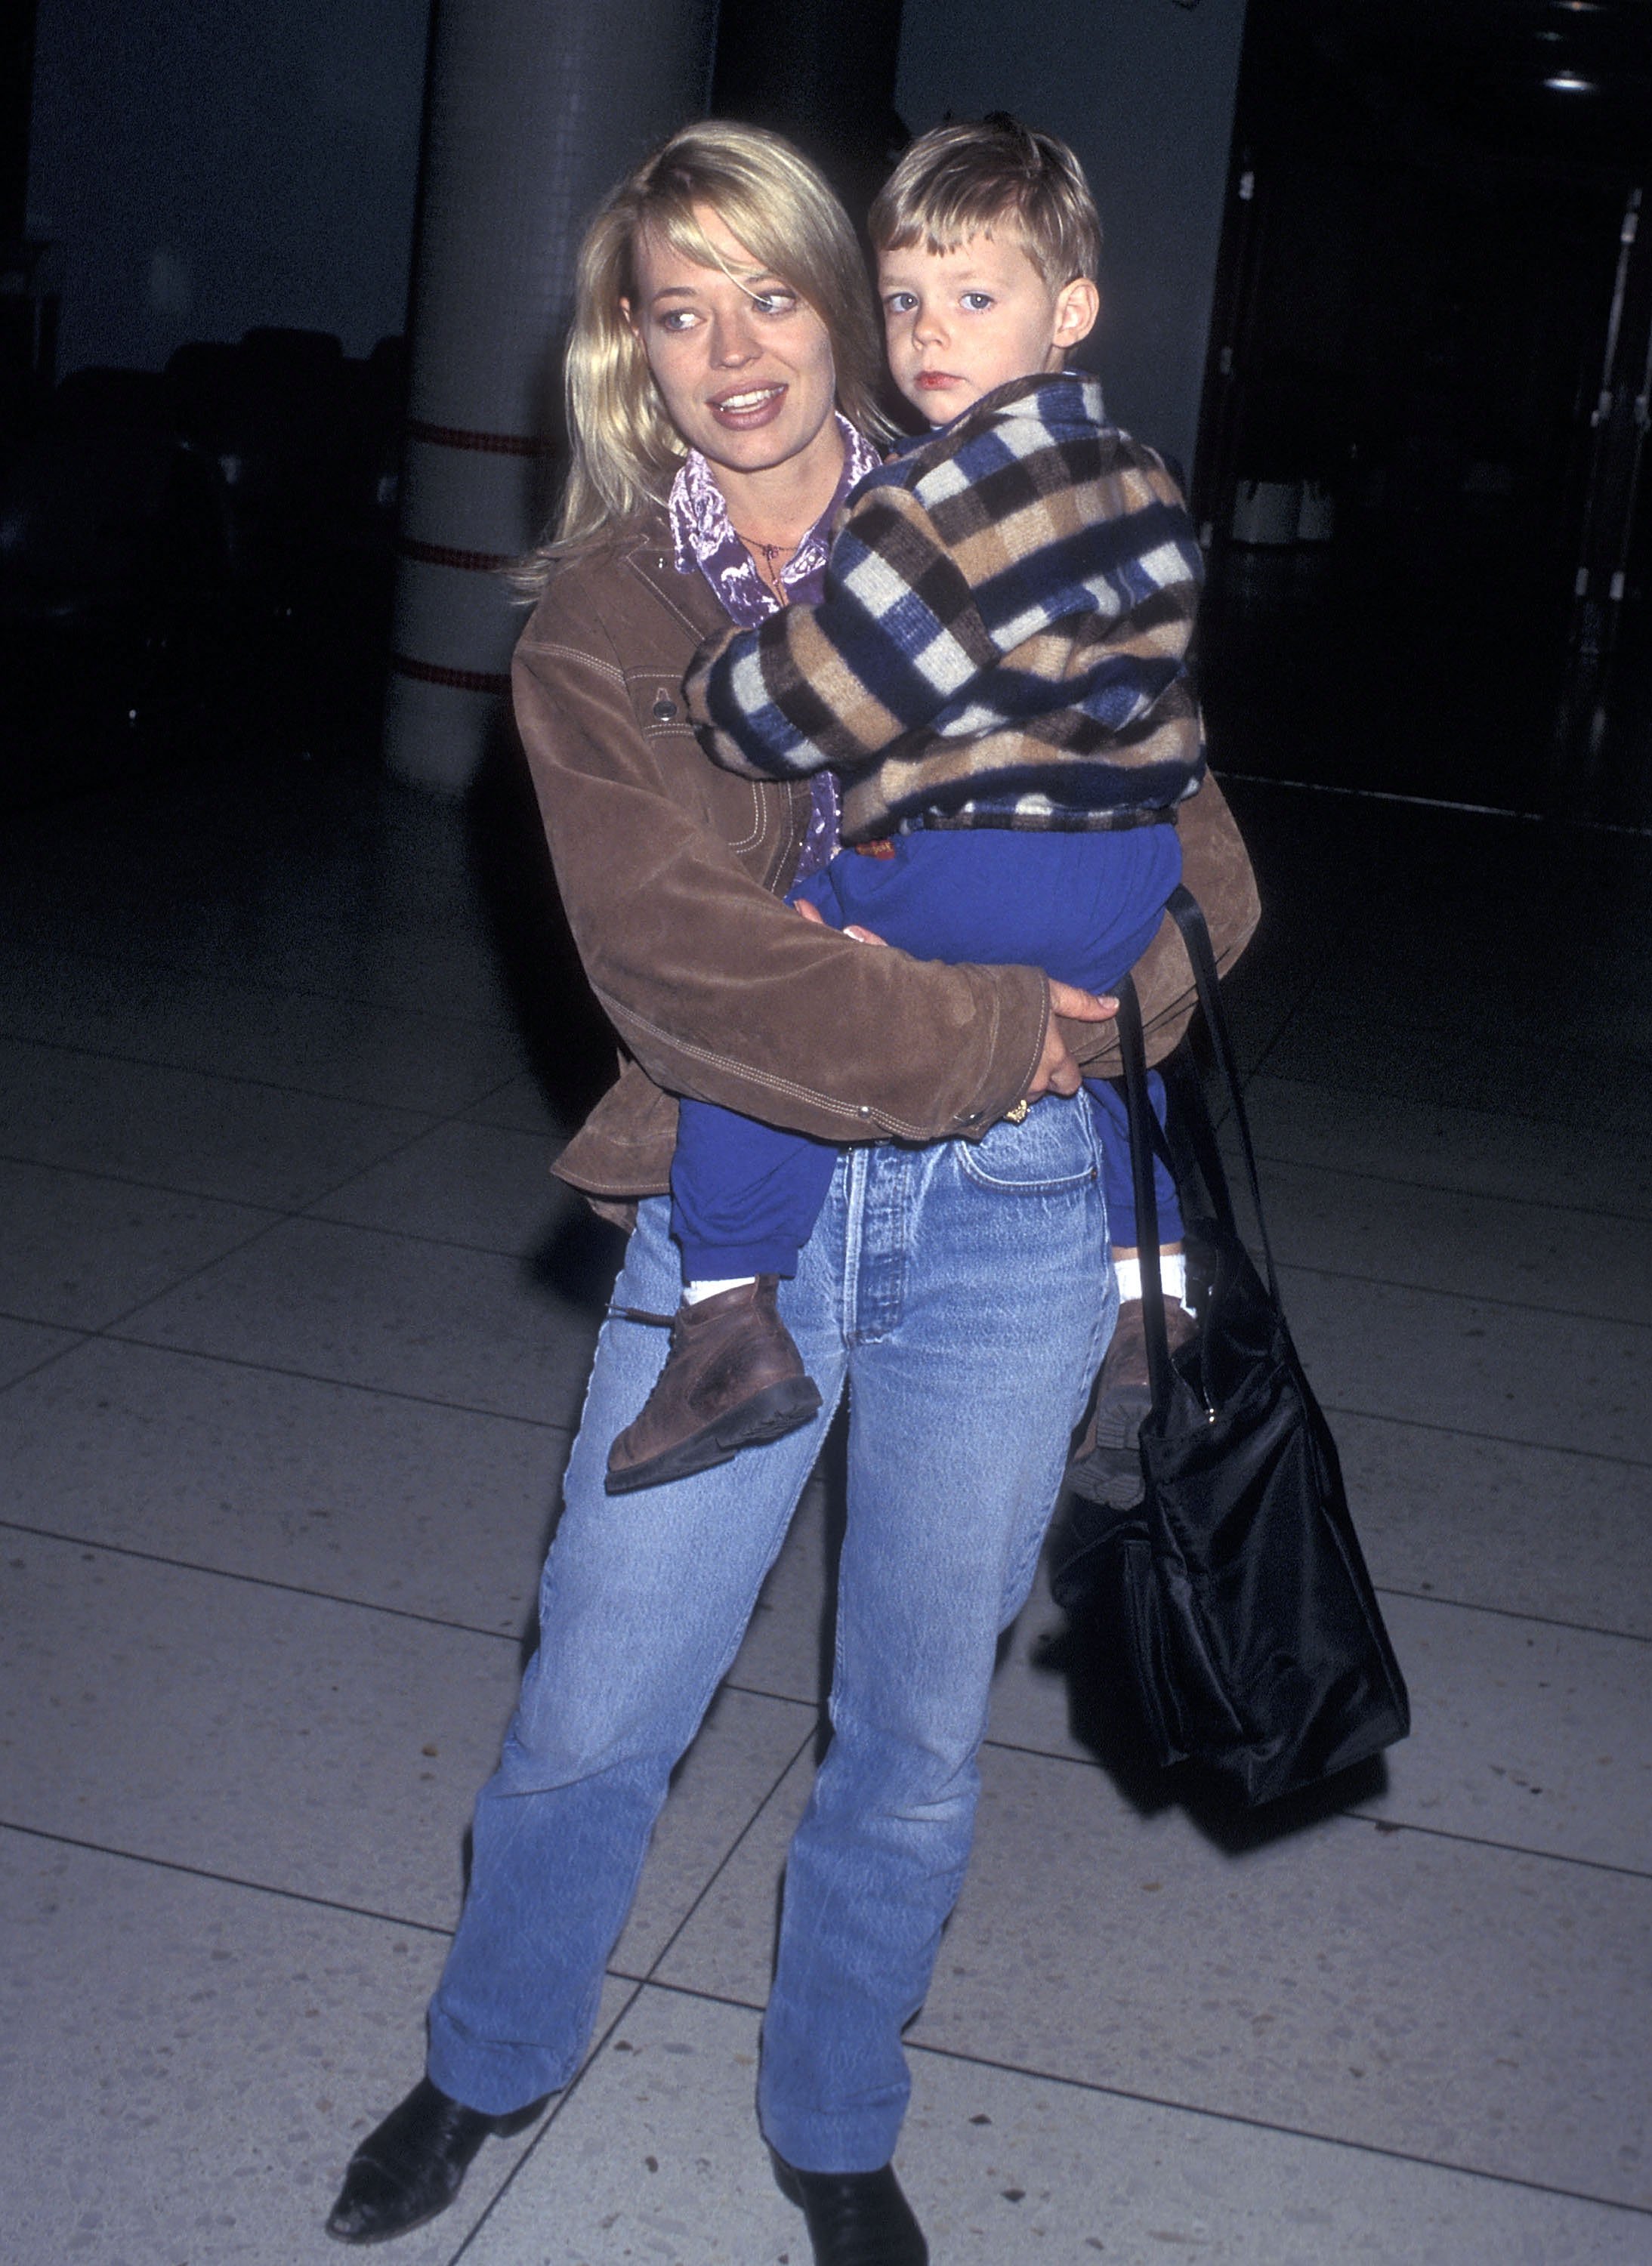 Jeri Ryan and son her Alex at the Los Angeles International Airport in California on March 10, 1997. | Source: Getty Images